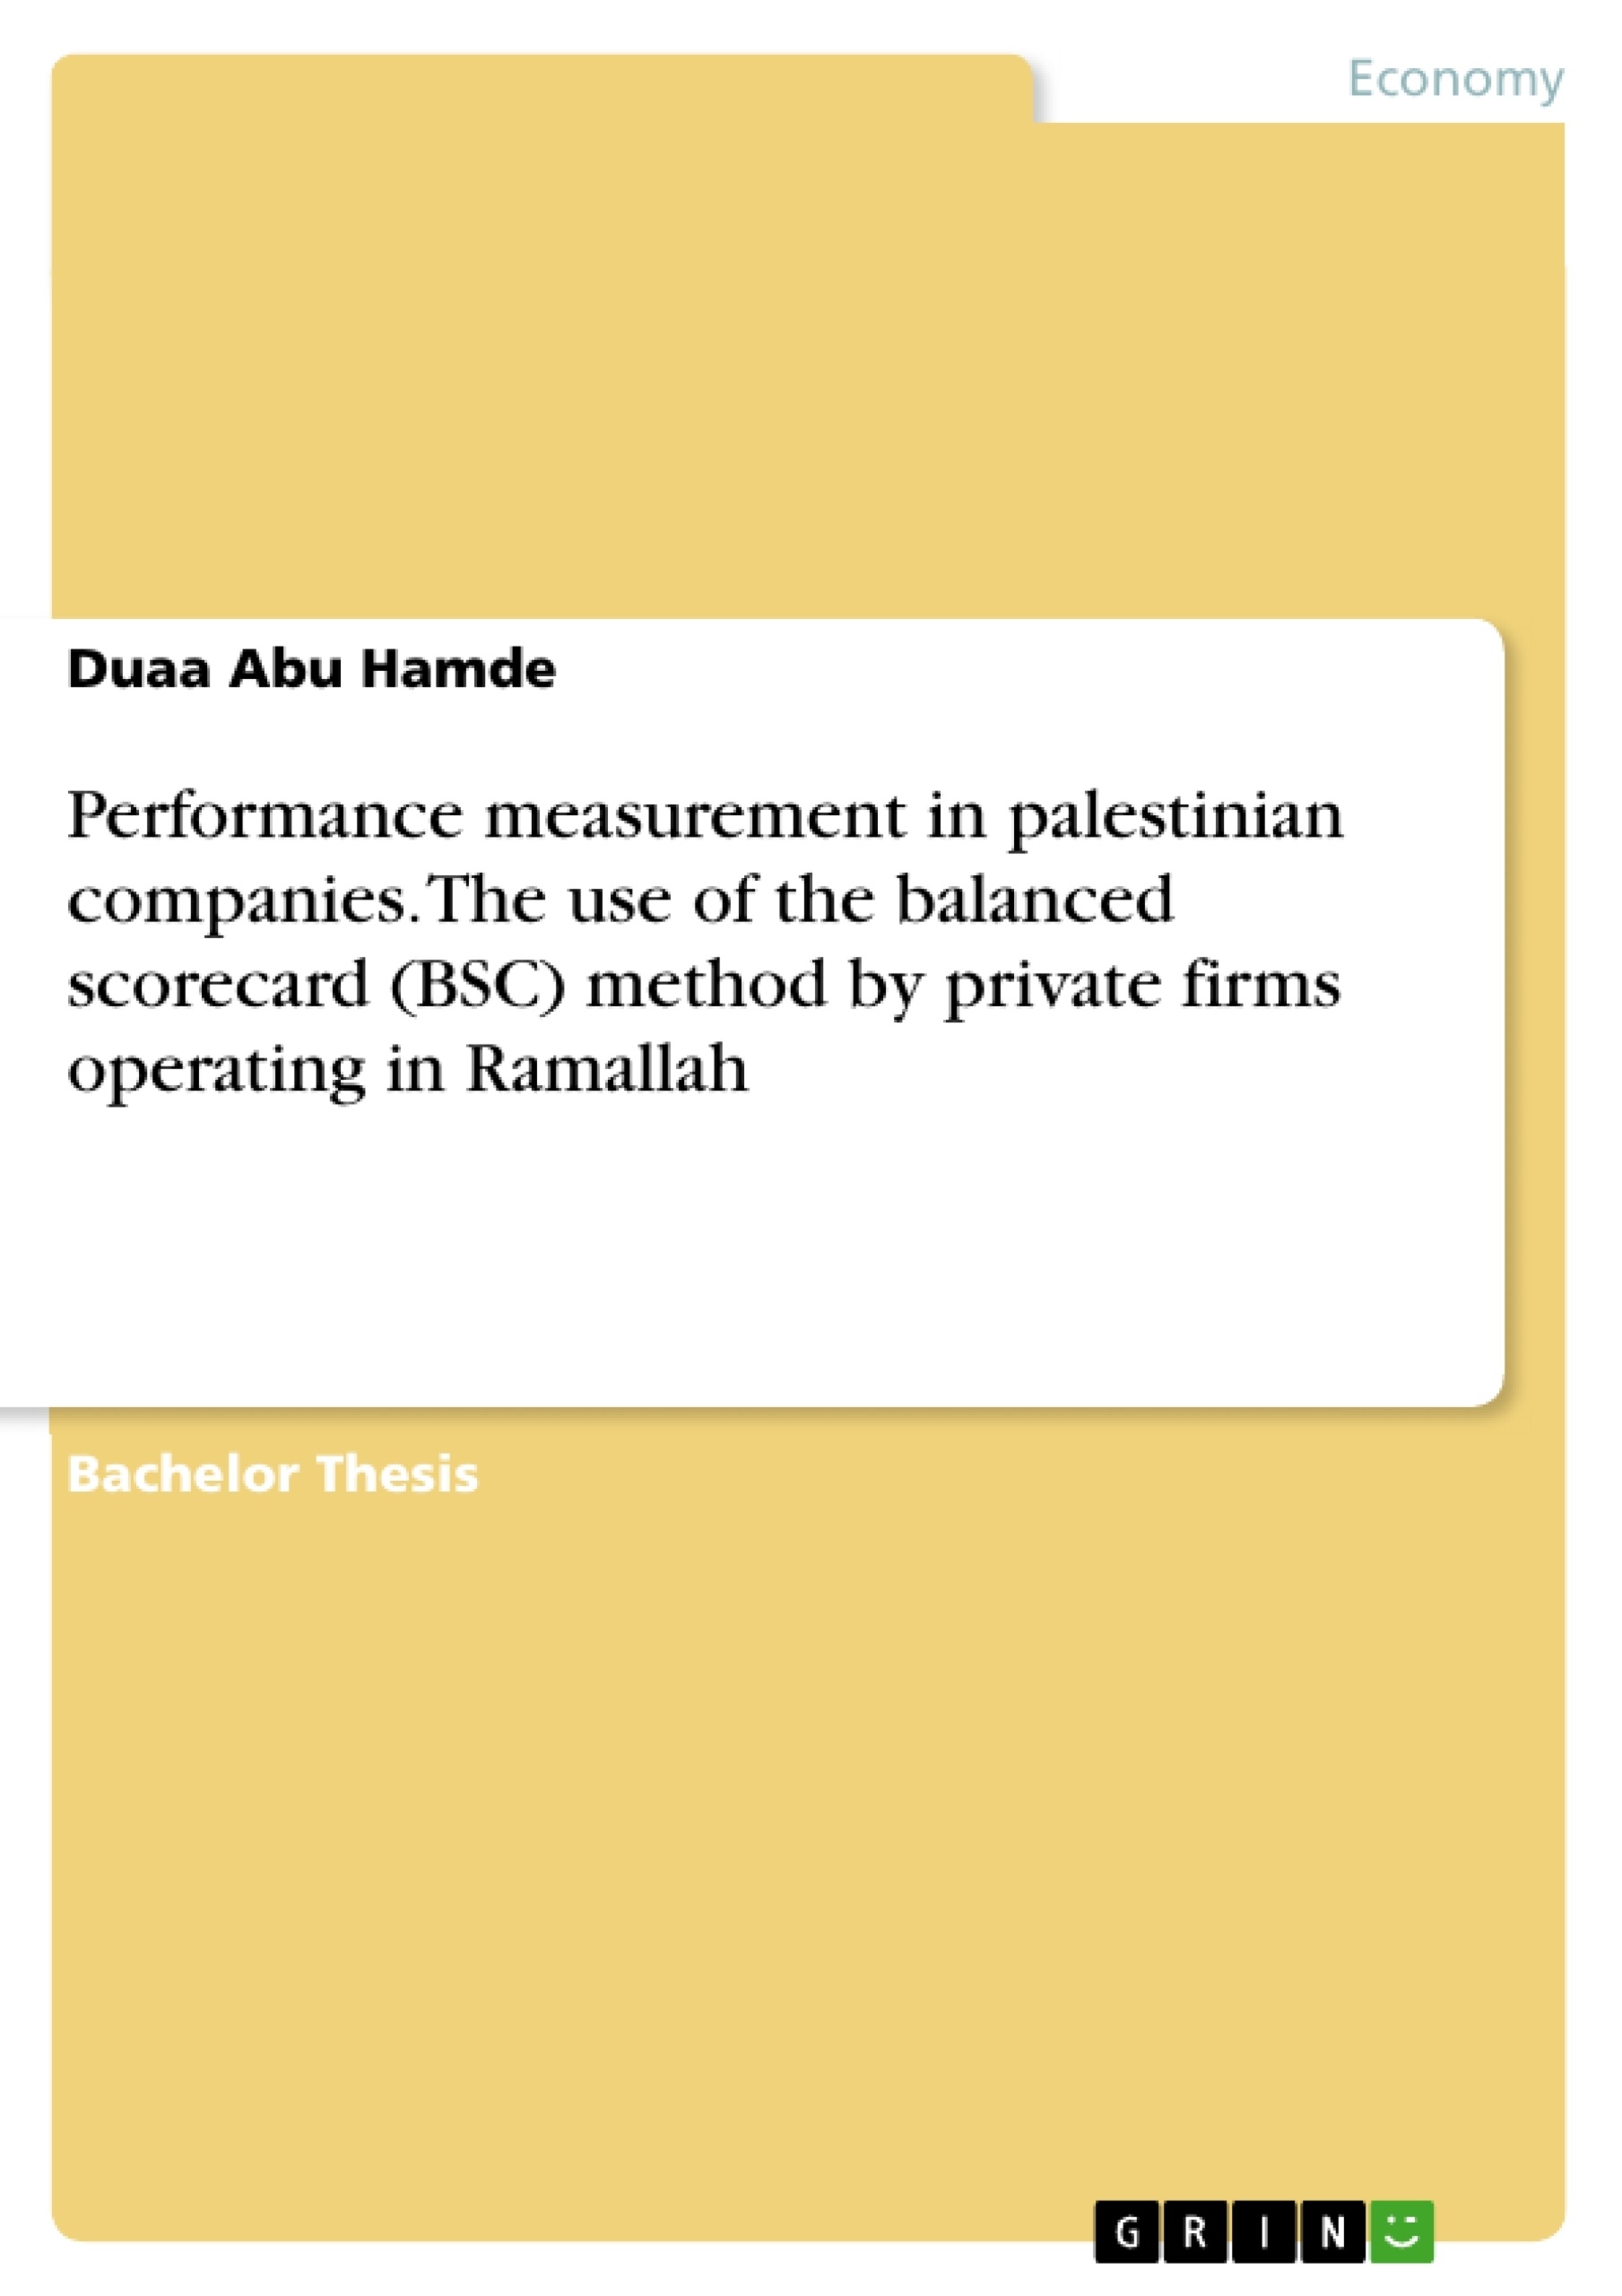 Title: Performance measurement in palestinian companies. The use of the balanced scorecard (BSC) method by private firms operating in Ramallah